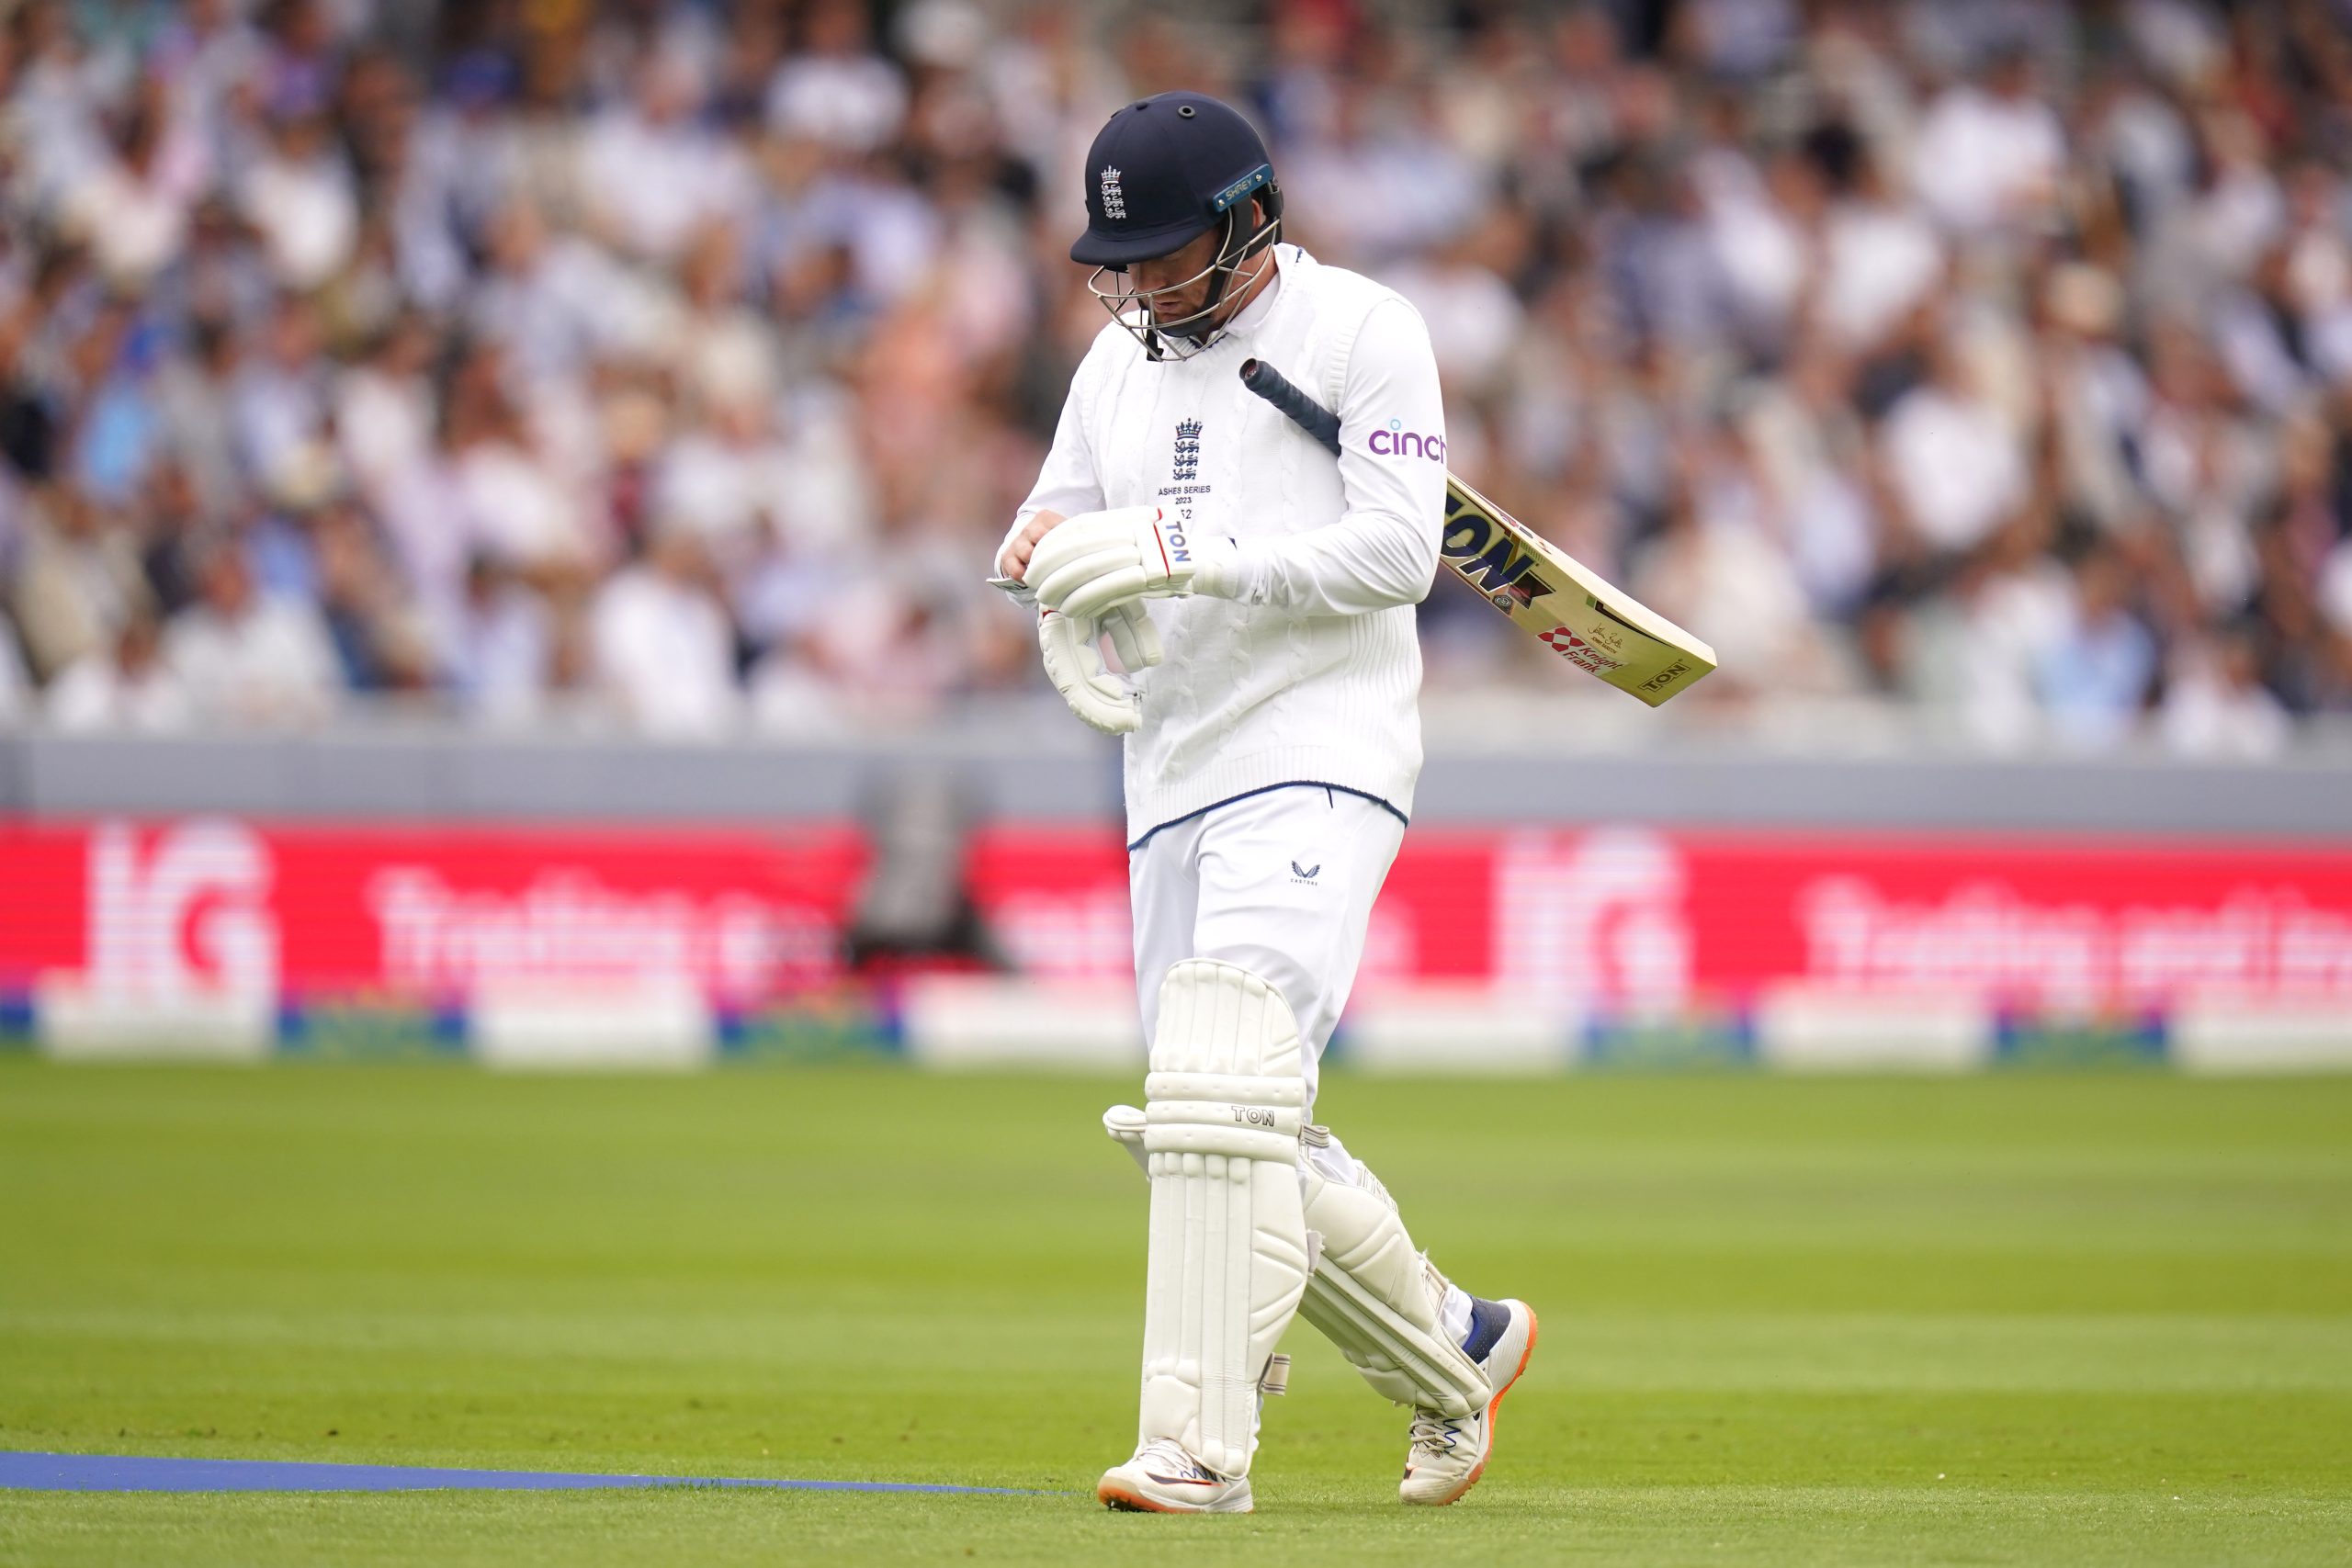 England left to rue costly batting errors as Australia seize control at Lord’s